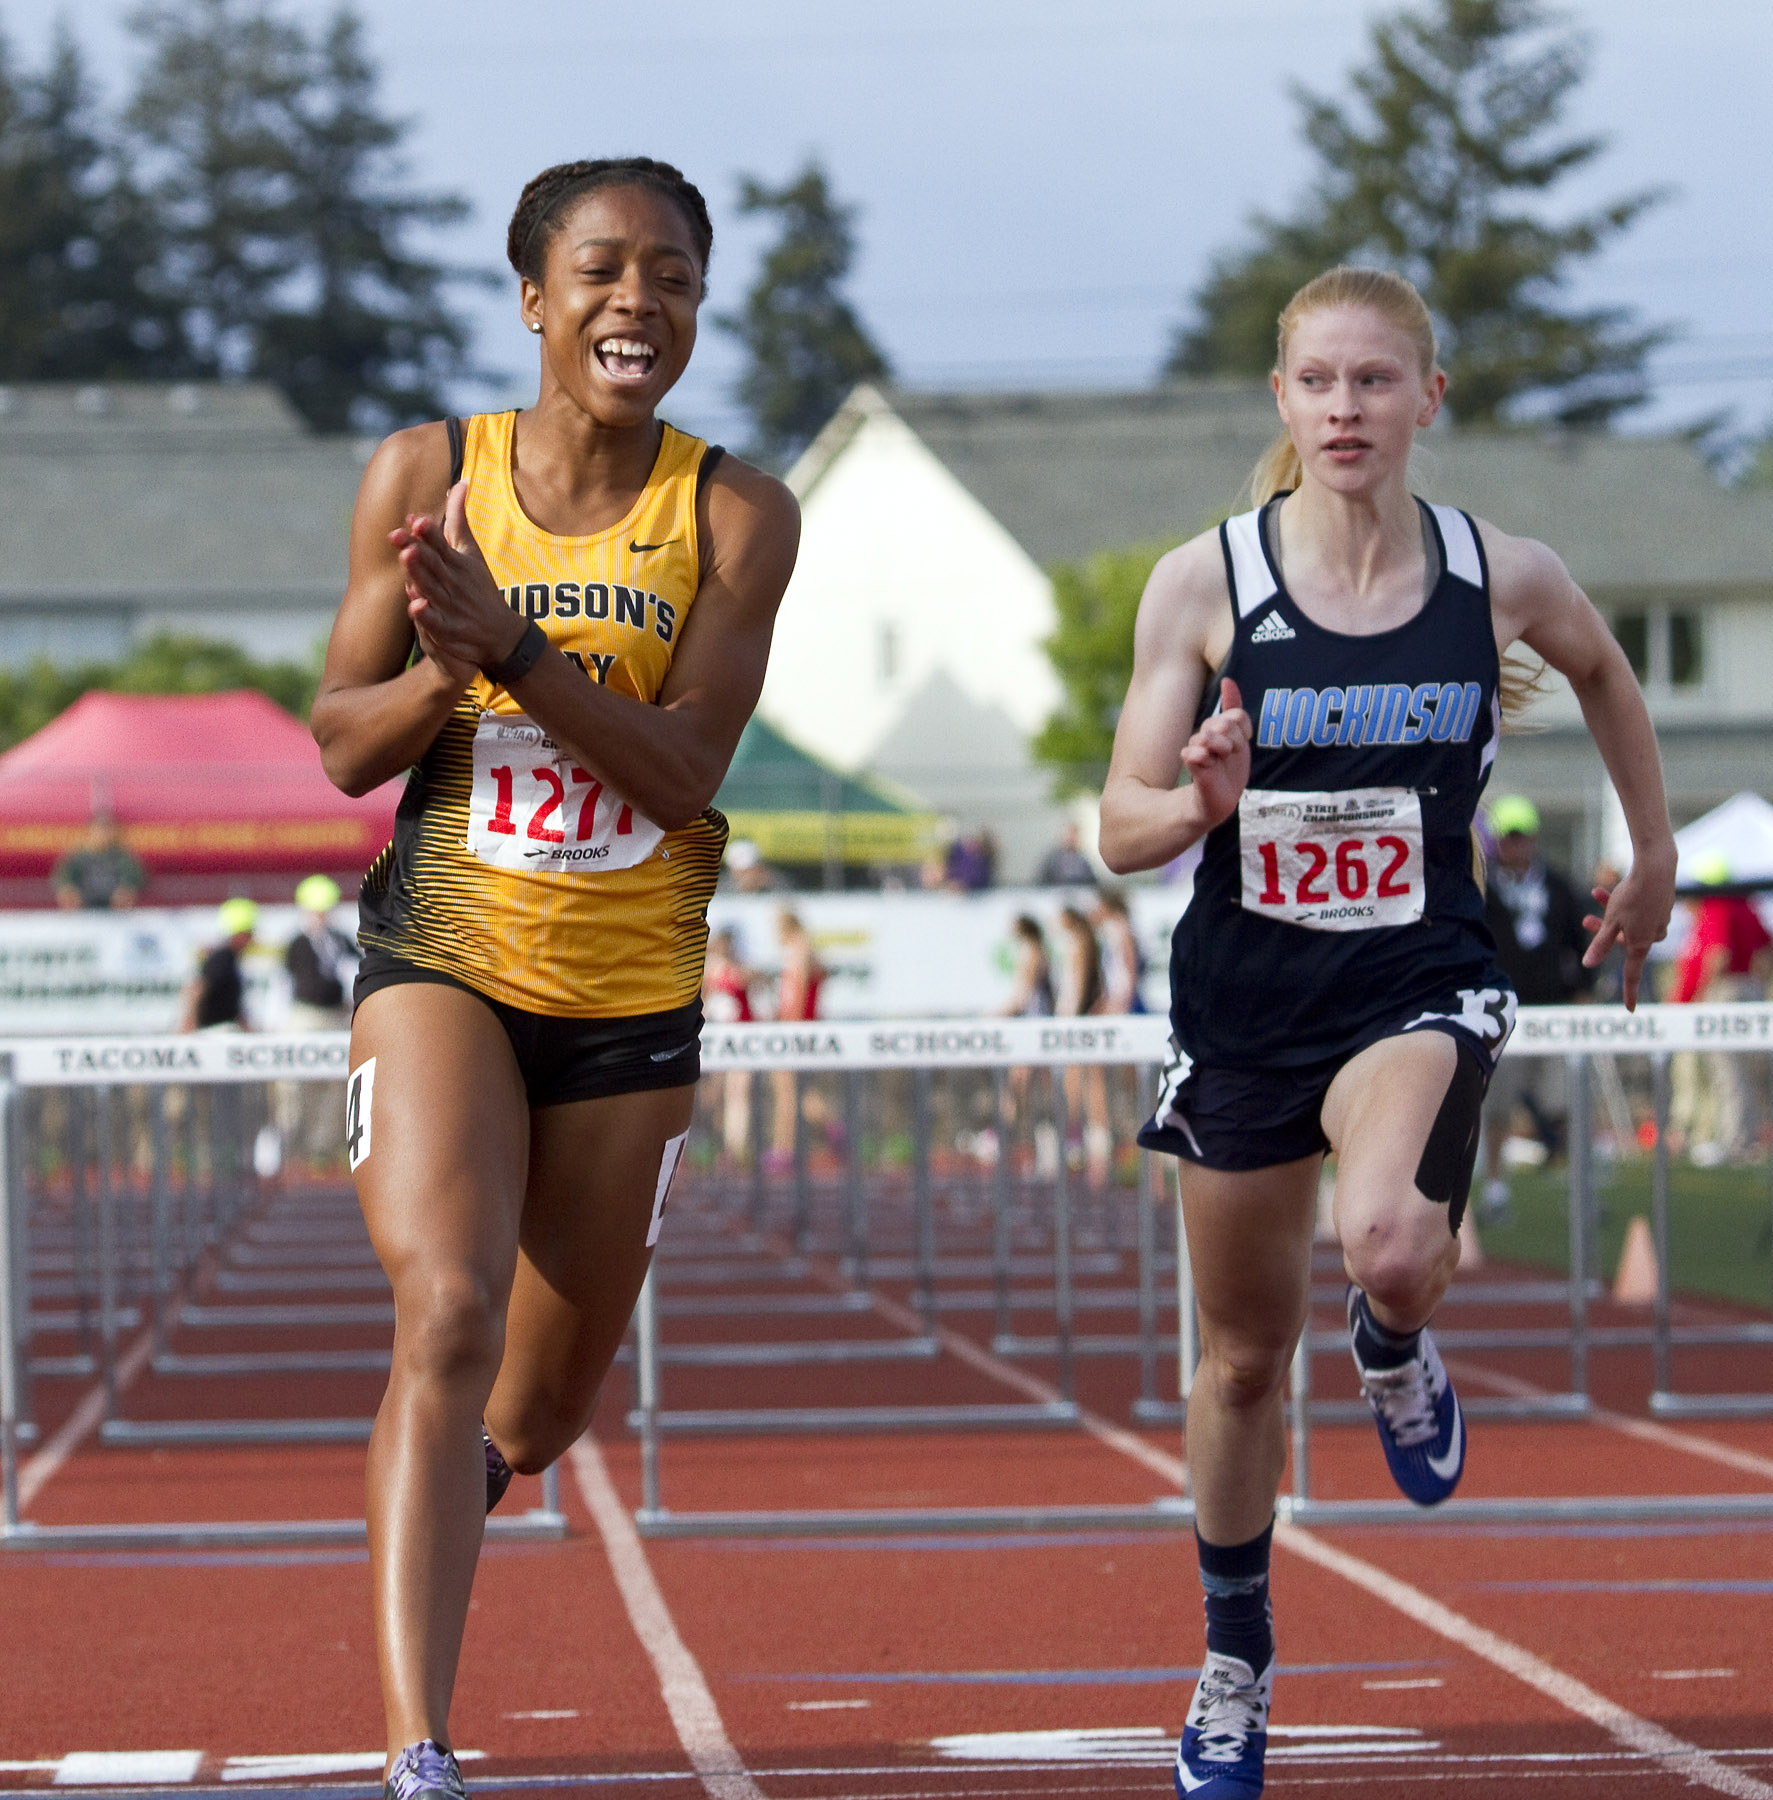 Hudson's Bay's Erykah Weems, left, celebrates as she crosses the finish line in 1st place during the 2A Girls 100 Meter Hurdles event at the State Track and Field Championships on May 27, 2016, in Tacoma, Wash.  Hockinson's Alyssa Chapin is on the right.